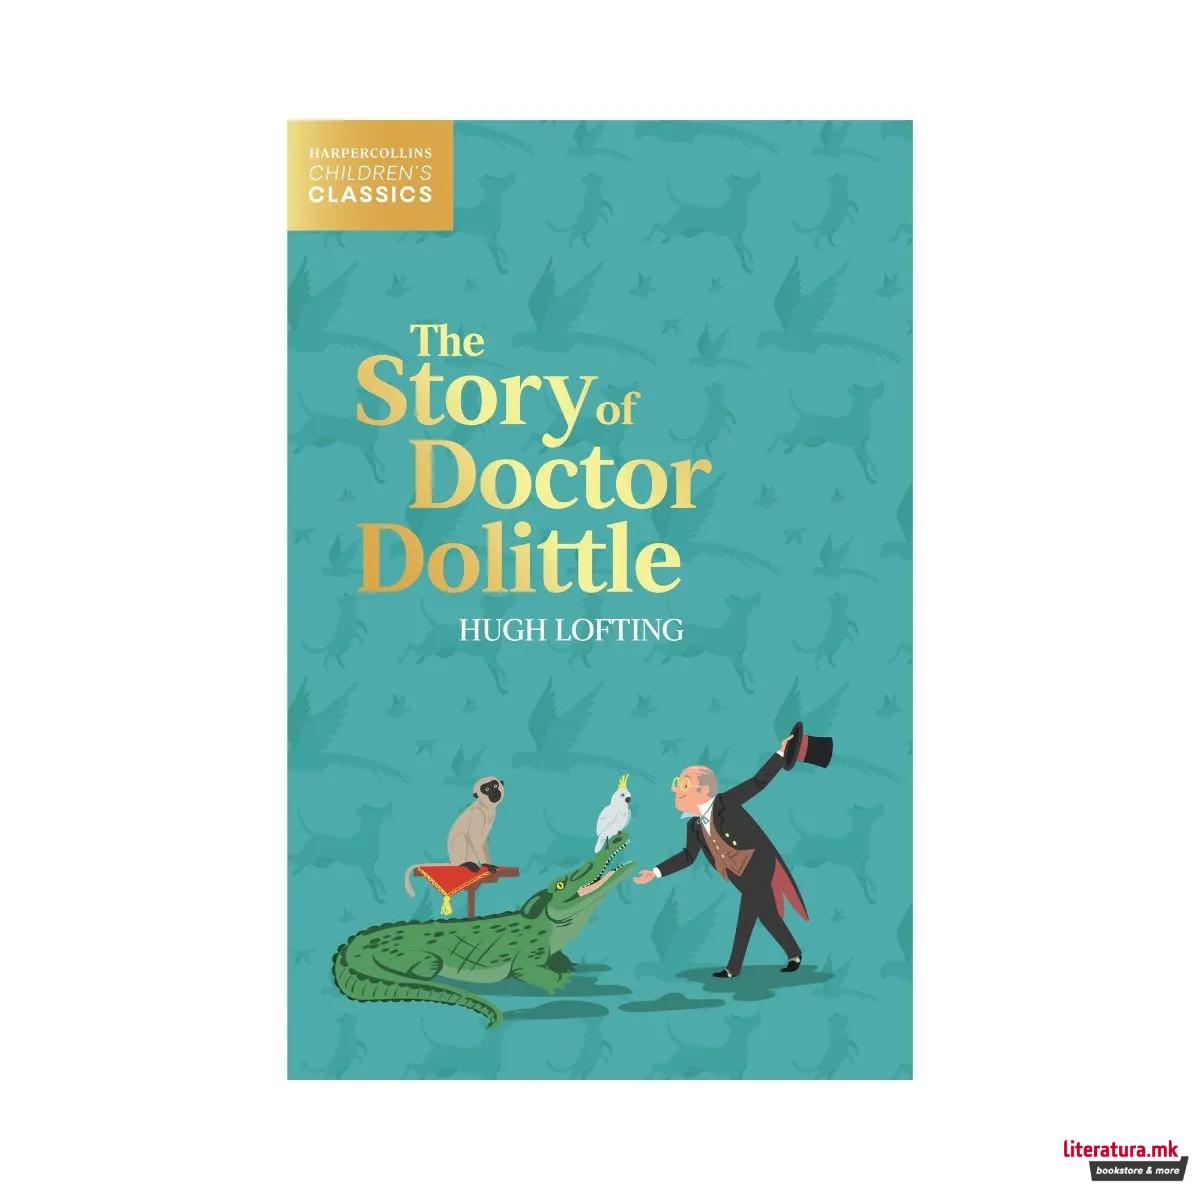 The Story of Doctor Dolittle (HarperCollins Children’s Classics) 